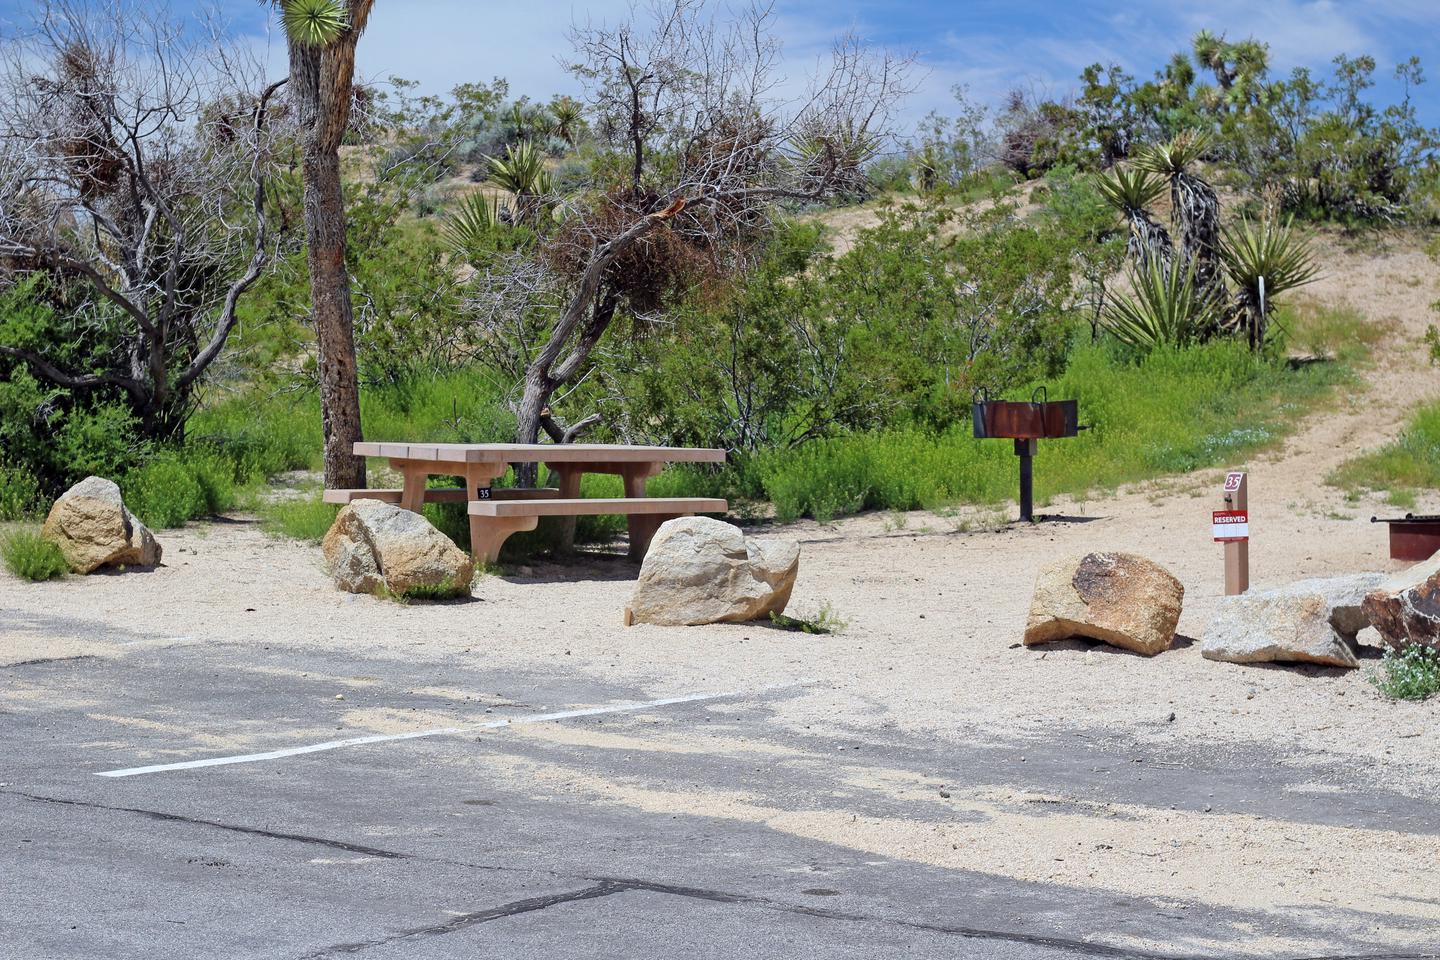 Parking for campsite. Picnic table surrounded by boulders and green plants.Shared parking for campsite.